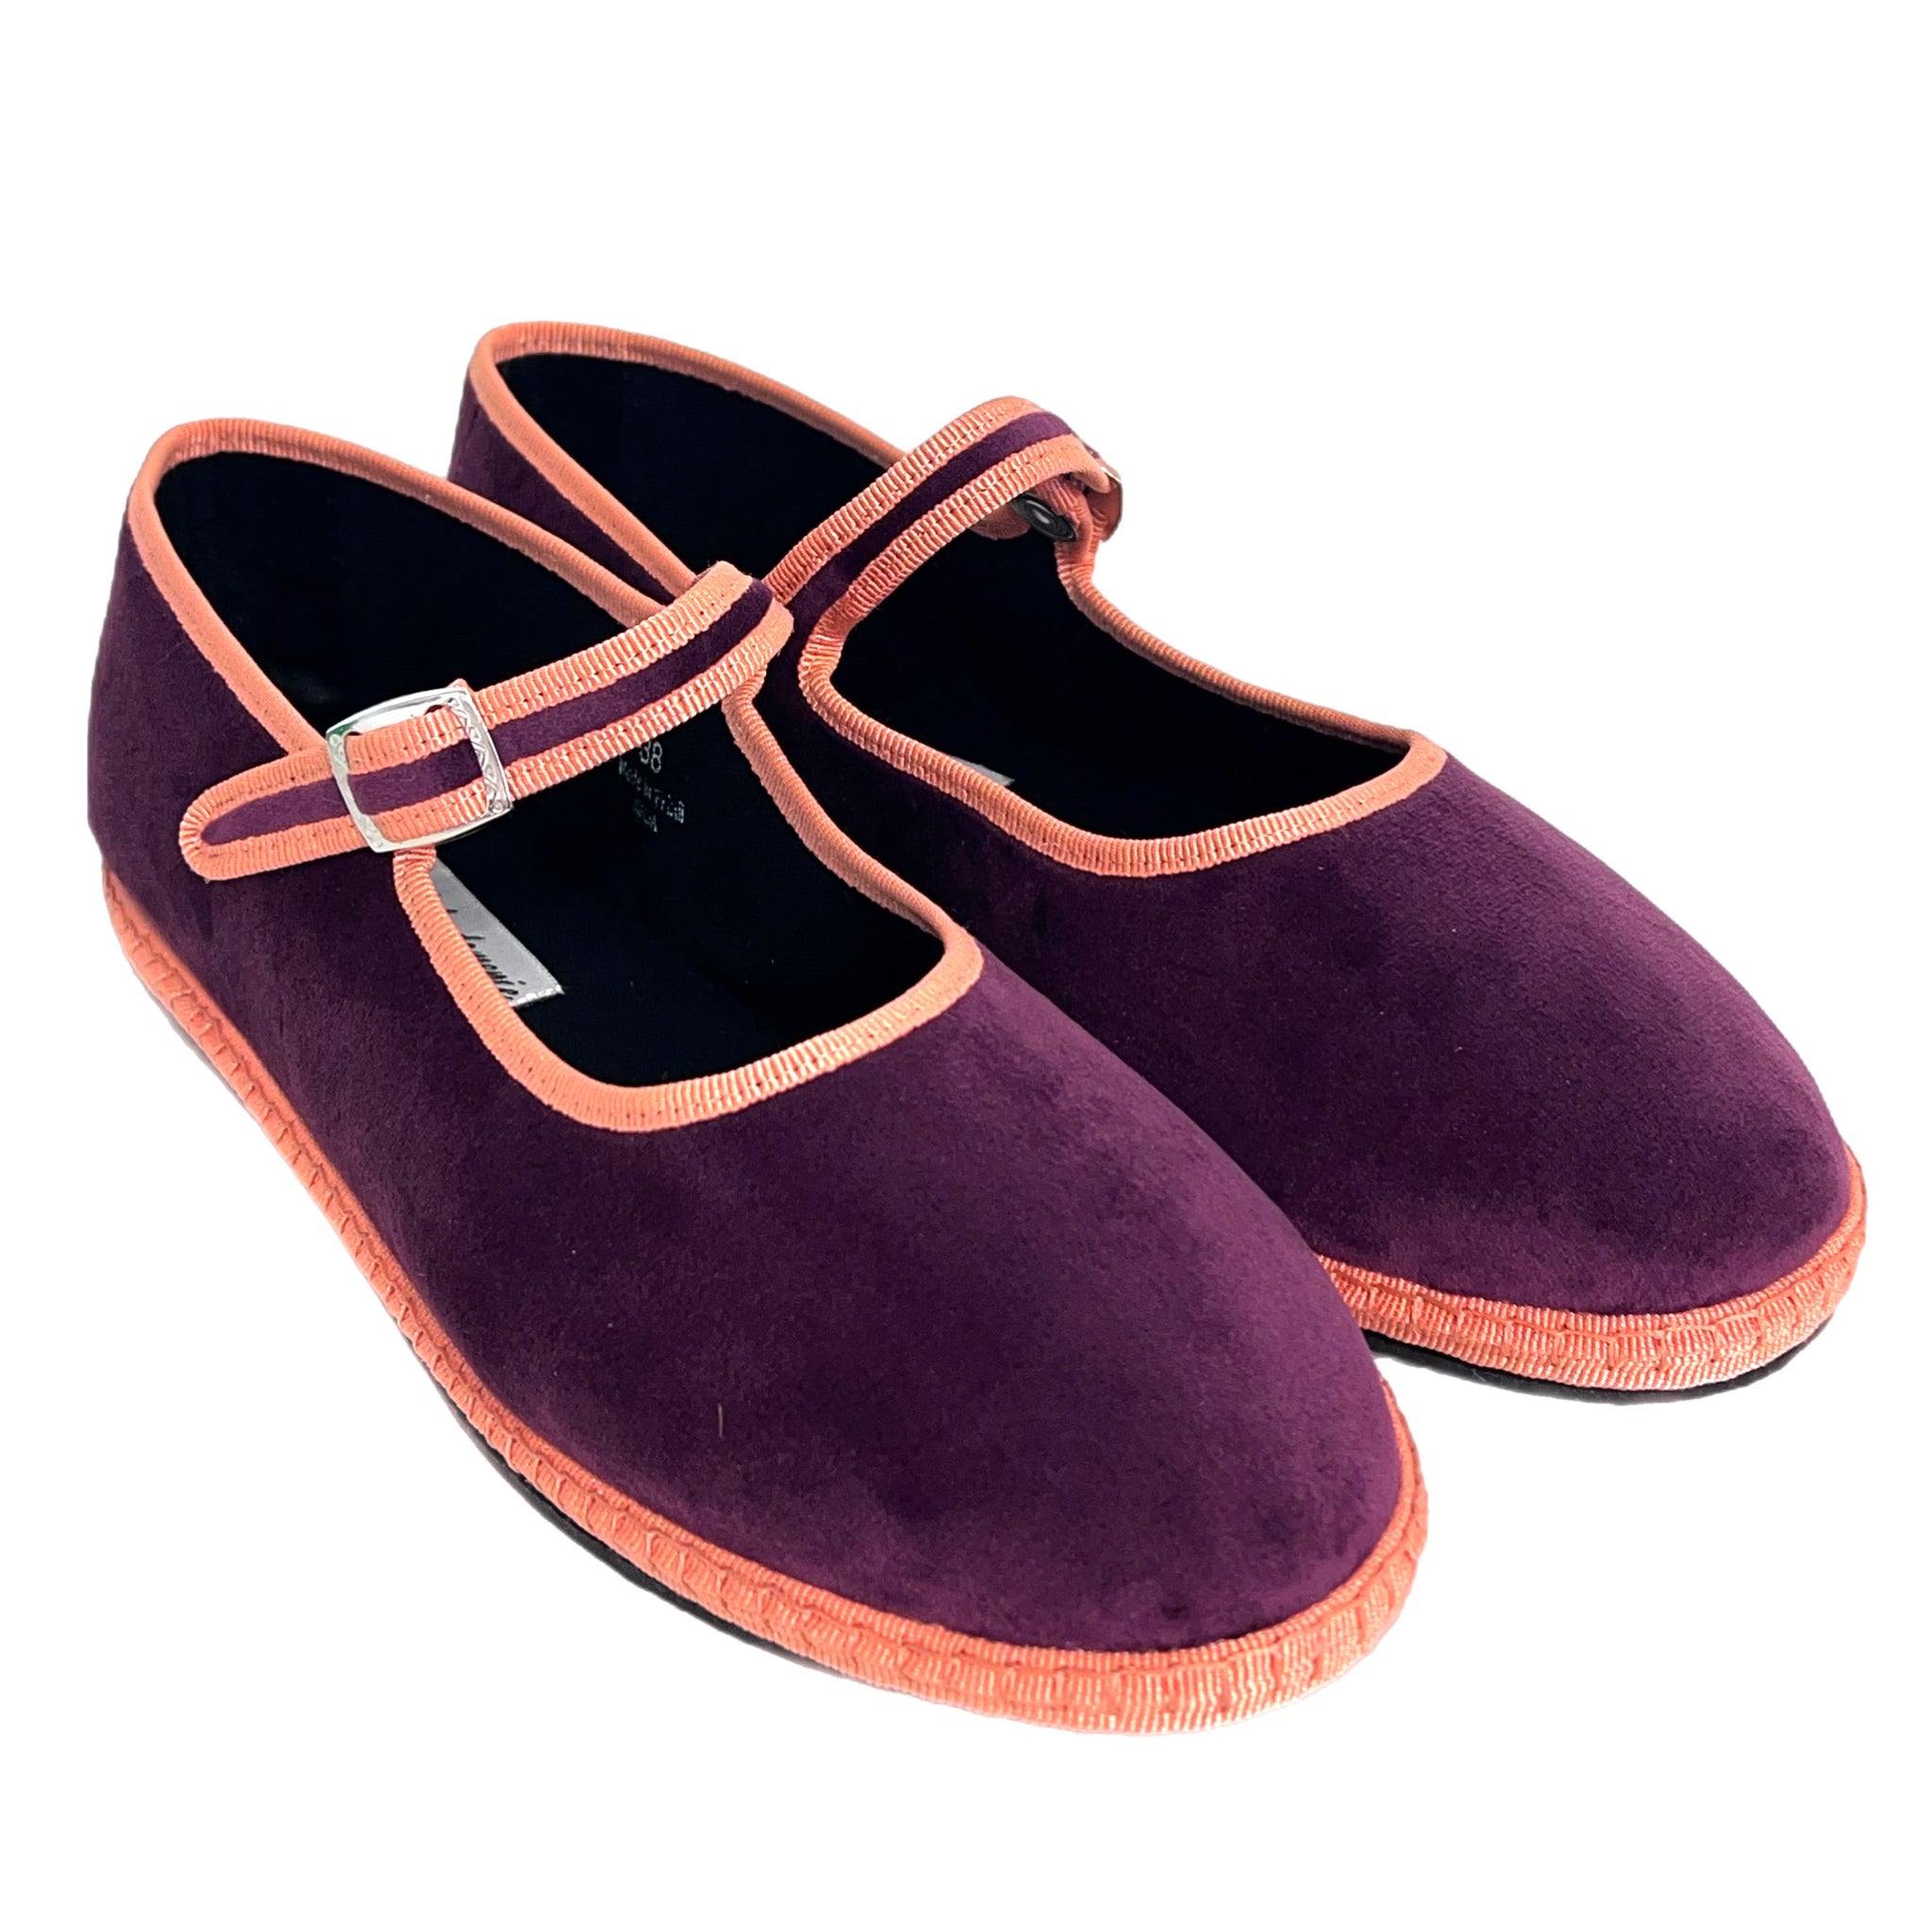 Purple and peach velvet baby Friulane shoes with hand-stitched rubber soles, made in Friuli, Italy.